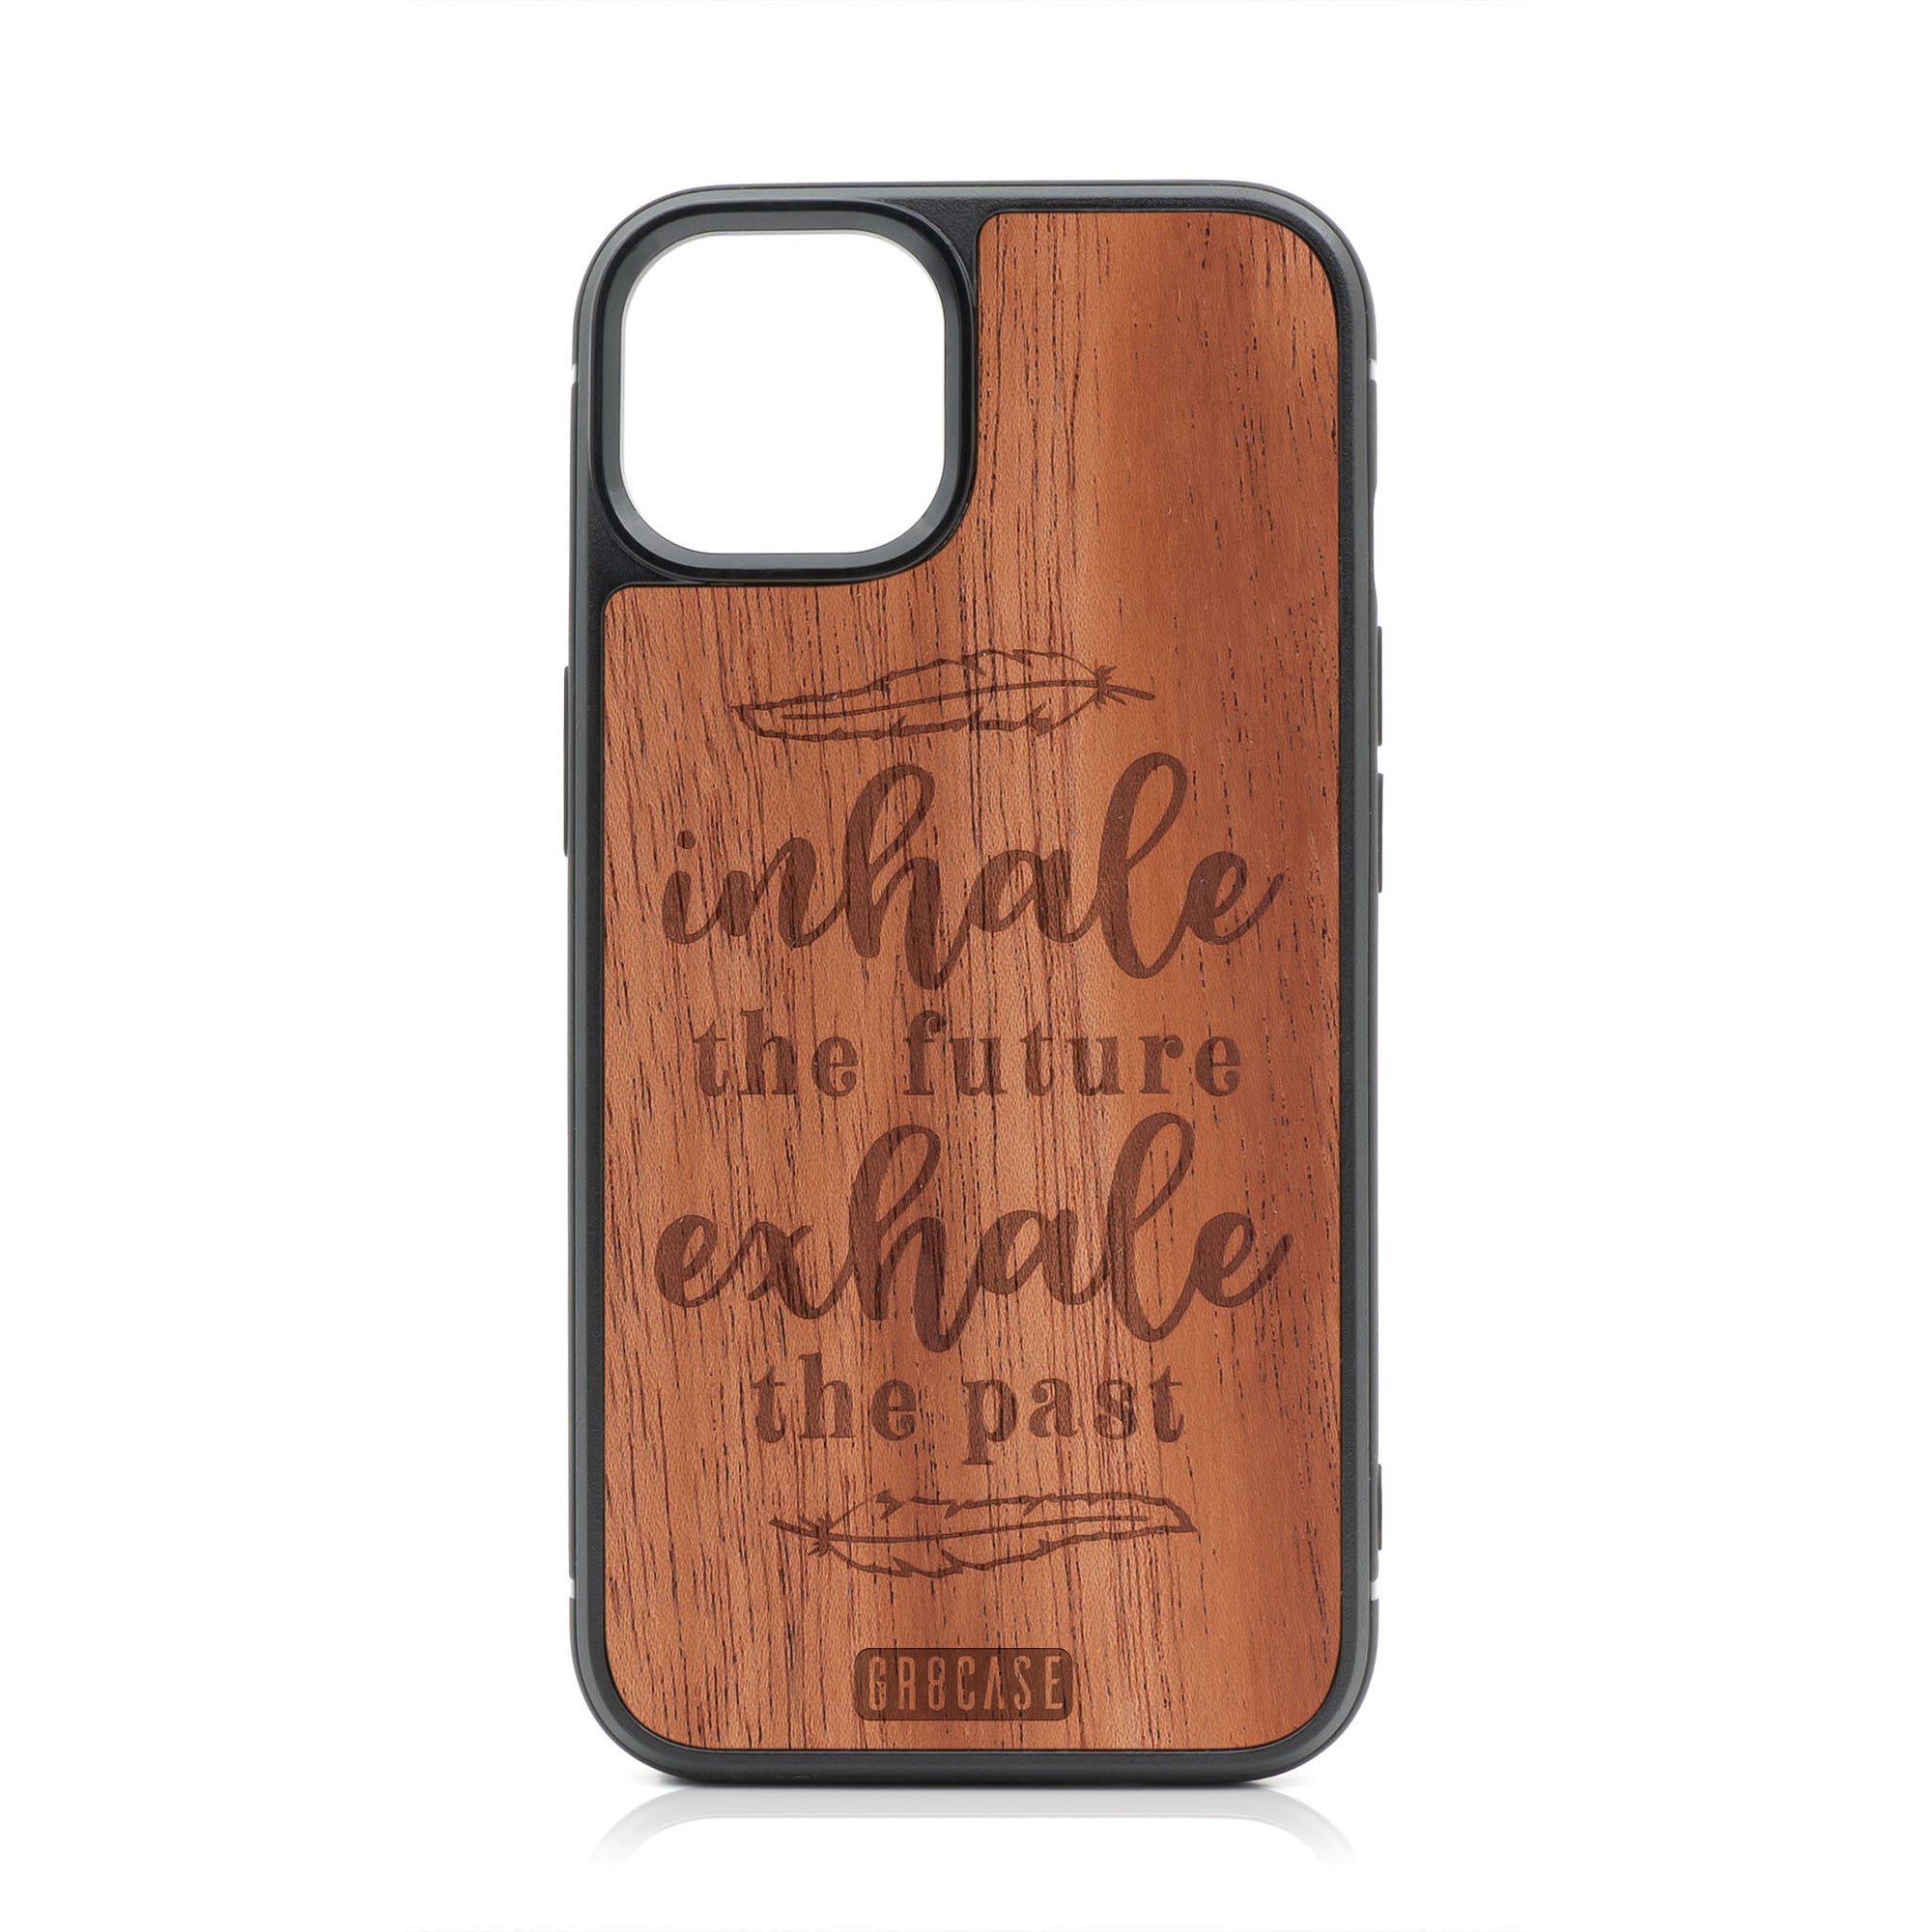 Inhale The Future Exhale The Past Design Wood Case For iPhone 13